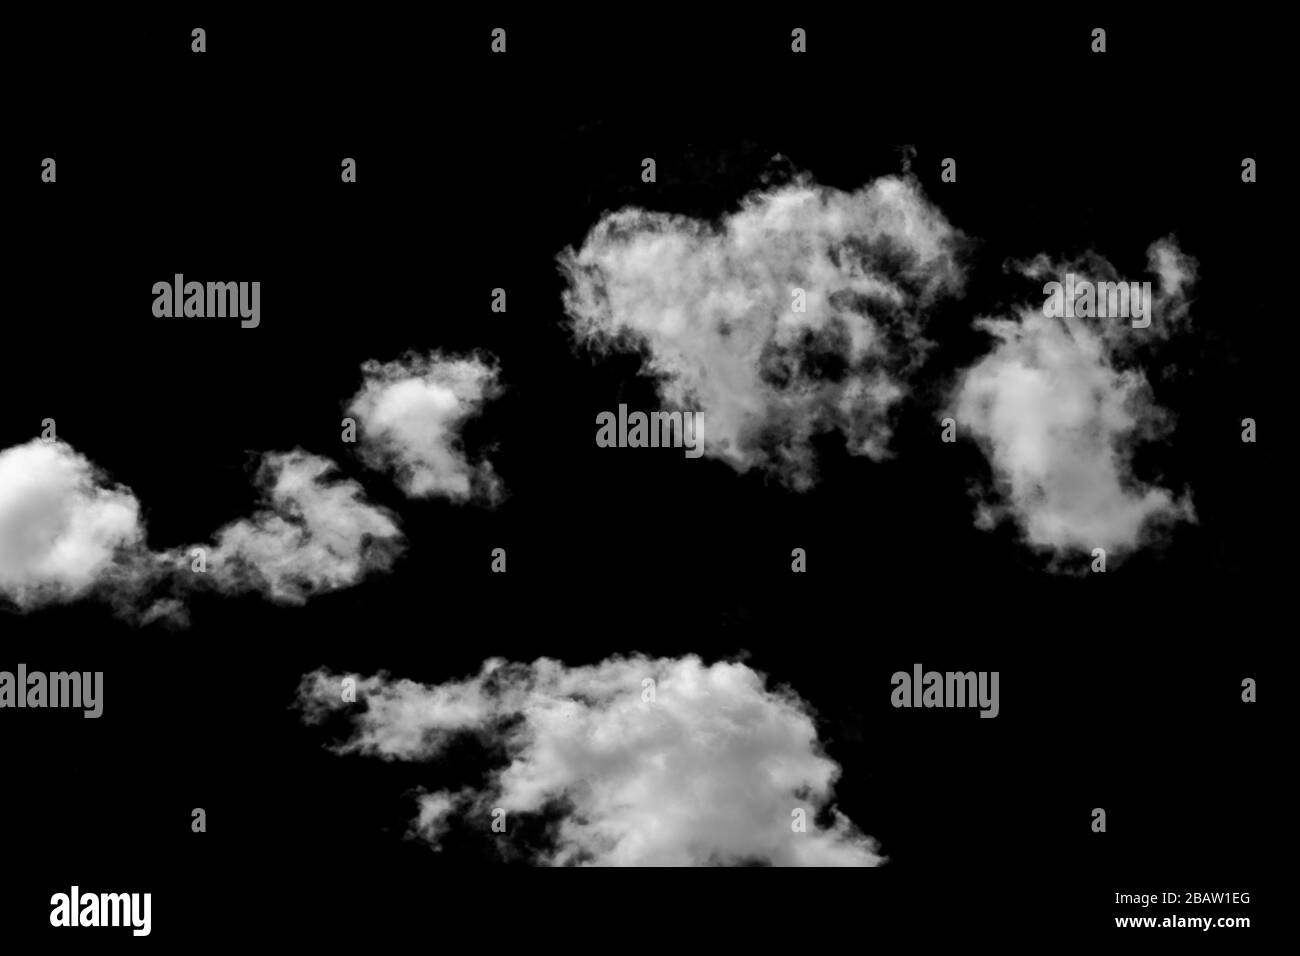 Real white and grey clouds isolated on black background. White fluffy clouds on dark background. Stock Photo